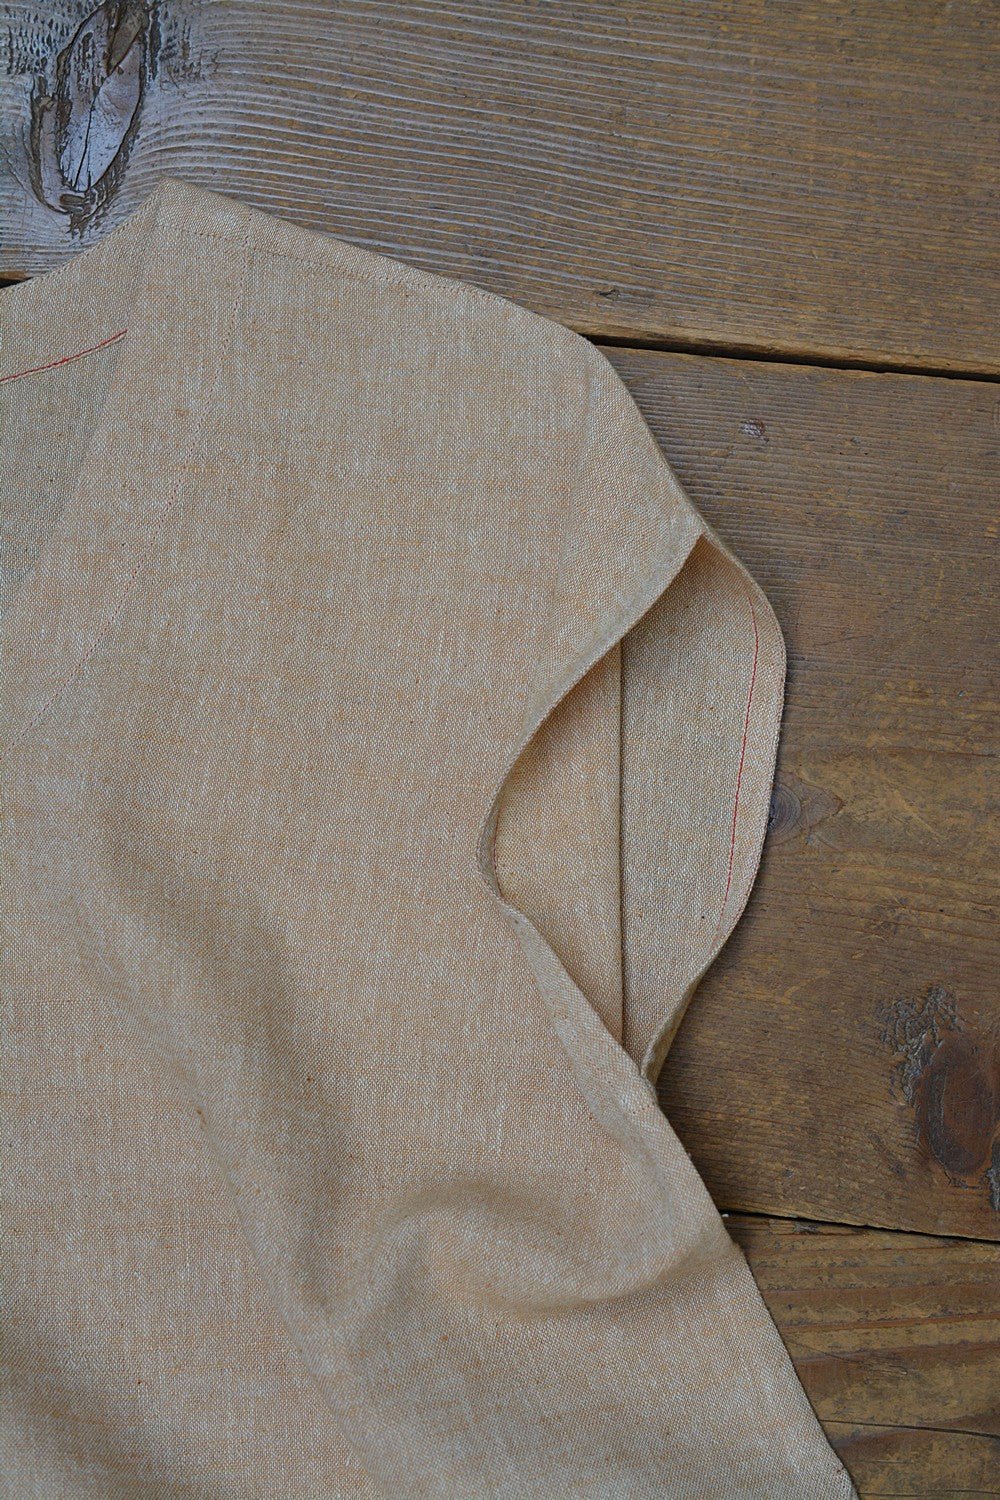 Extended Shoulder Tunic in Size 'L' - metaphorracha